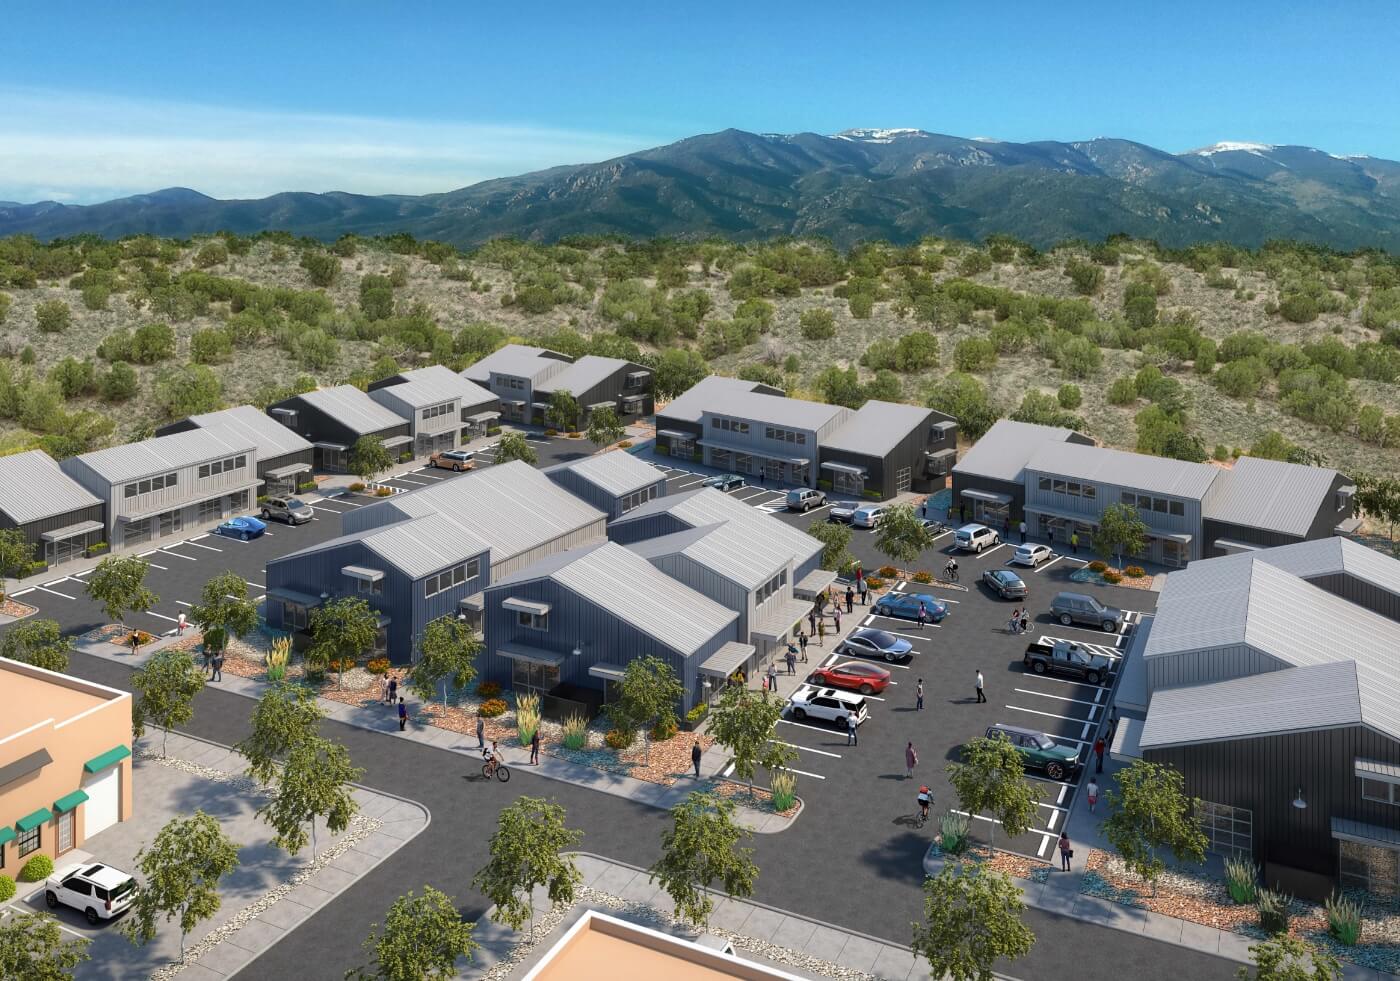 An architect's rendering of a residential area with mountains in the background.